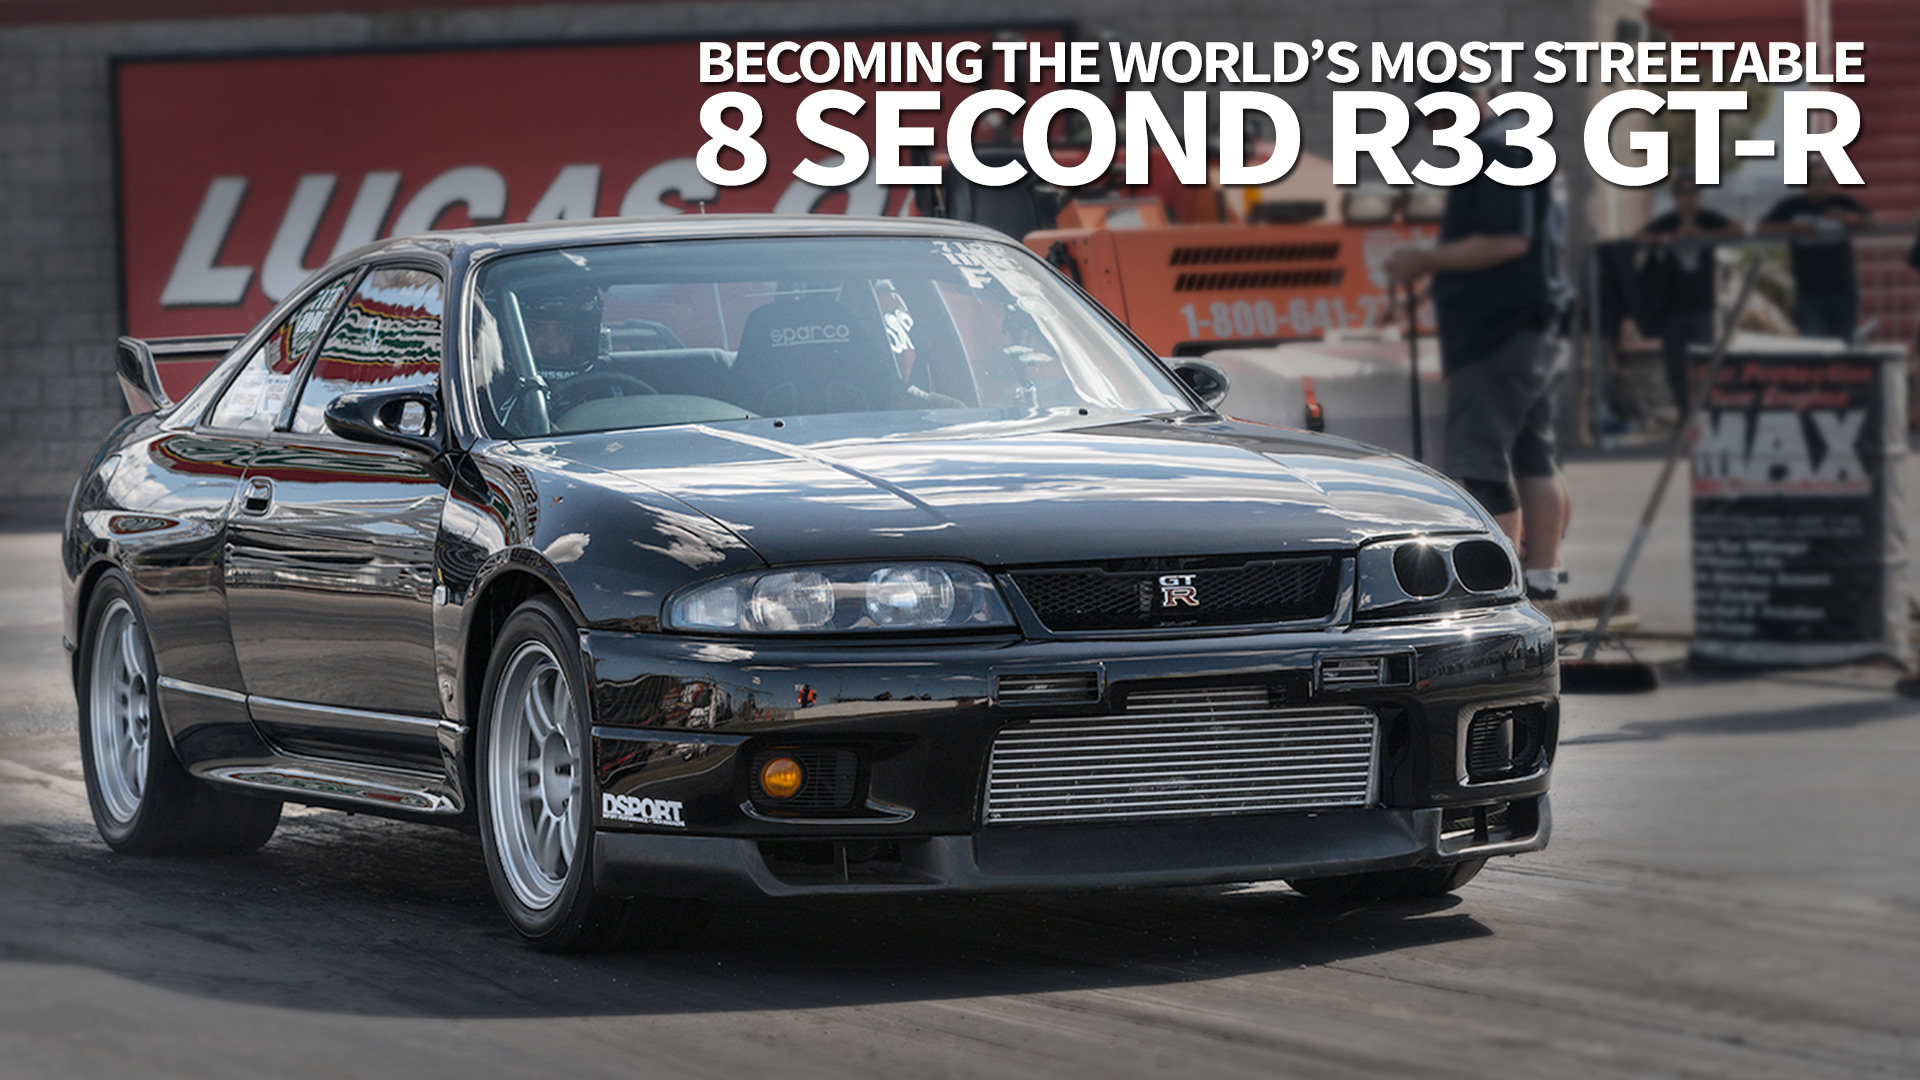 Becoming the World’s Most Streetable 8-second R33 GT-R